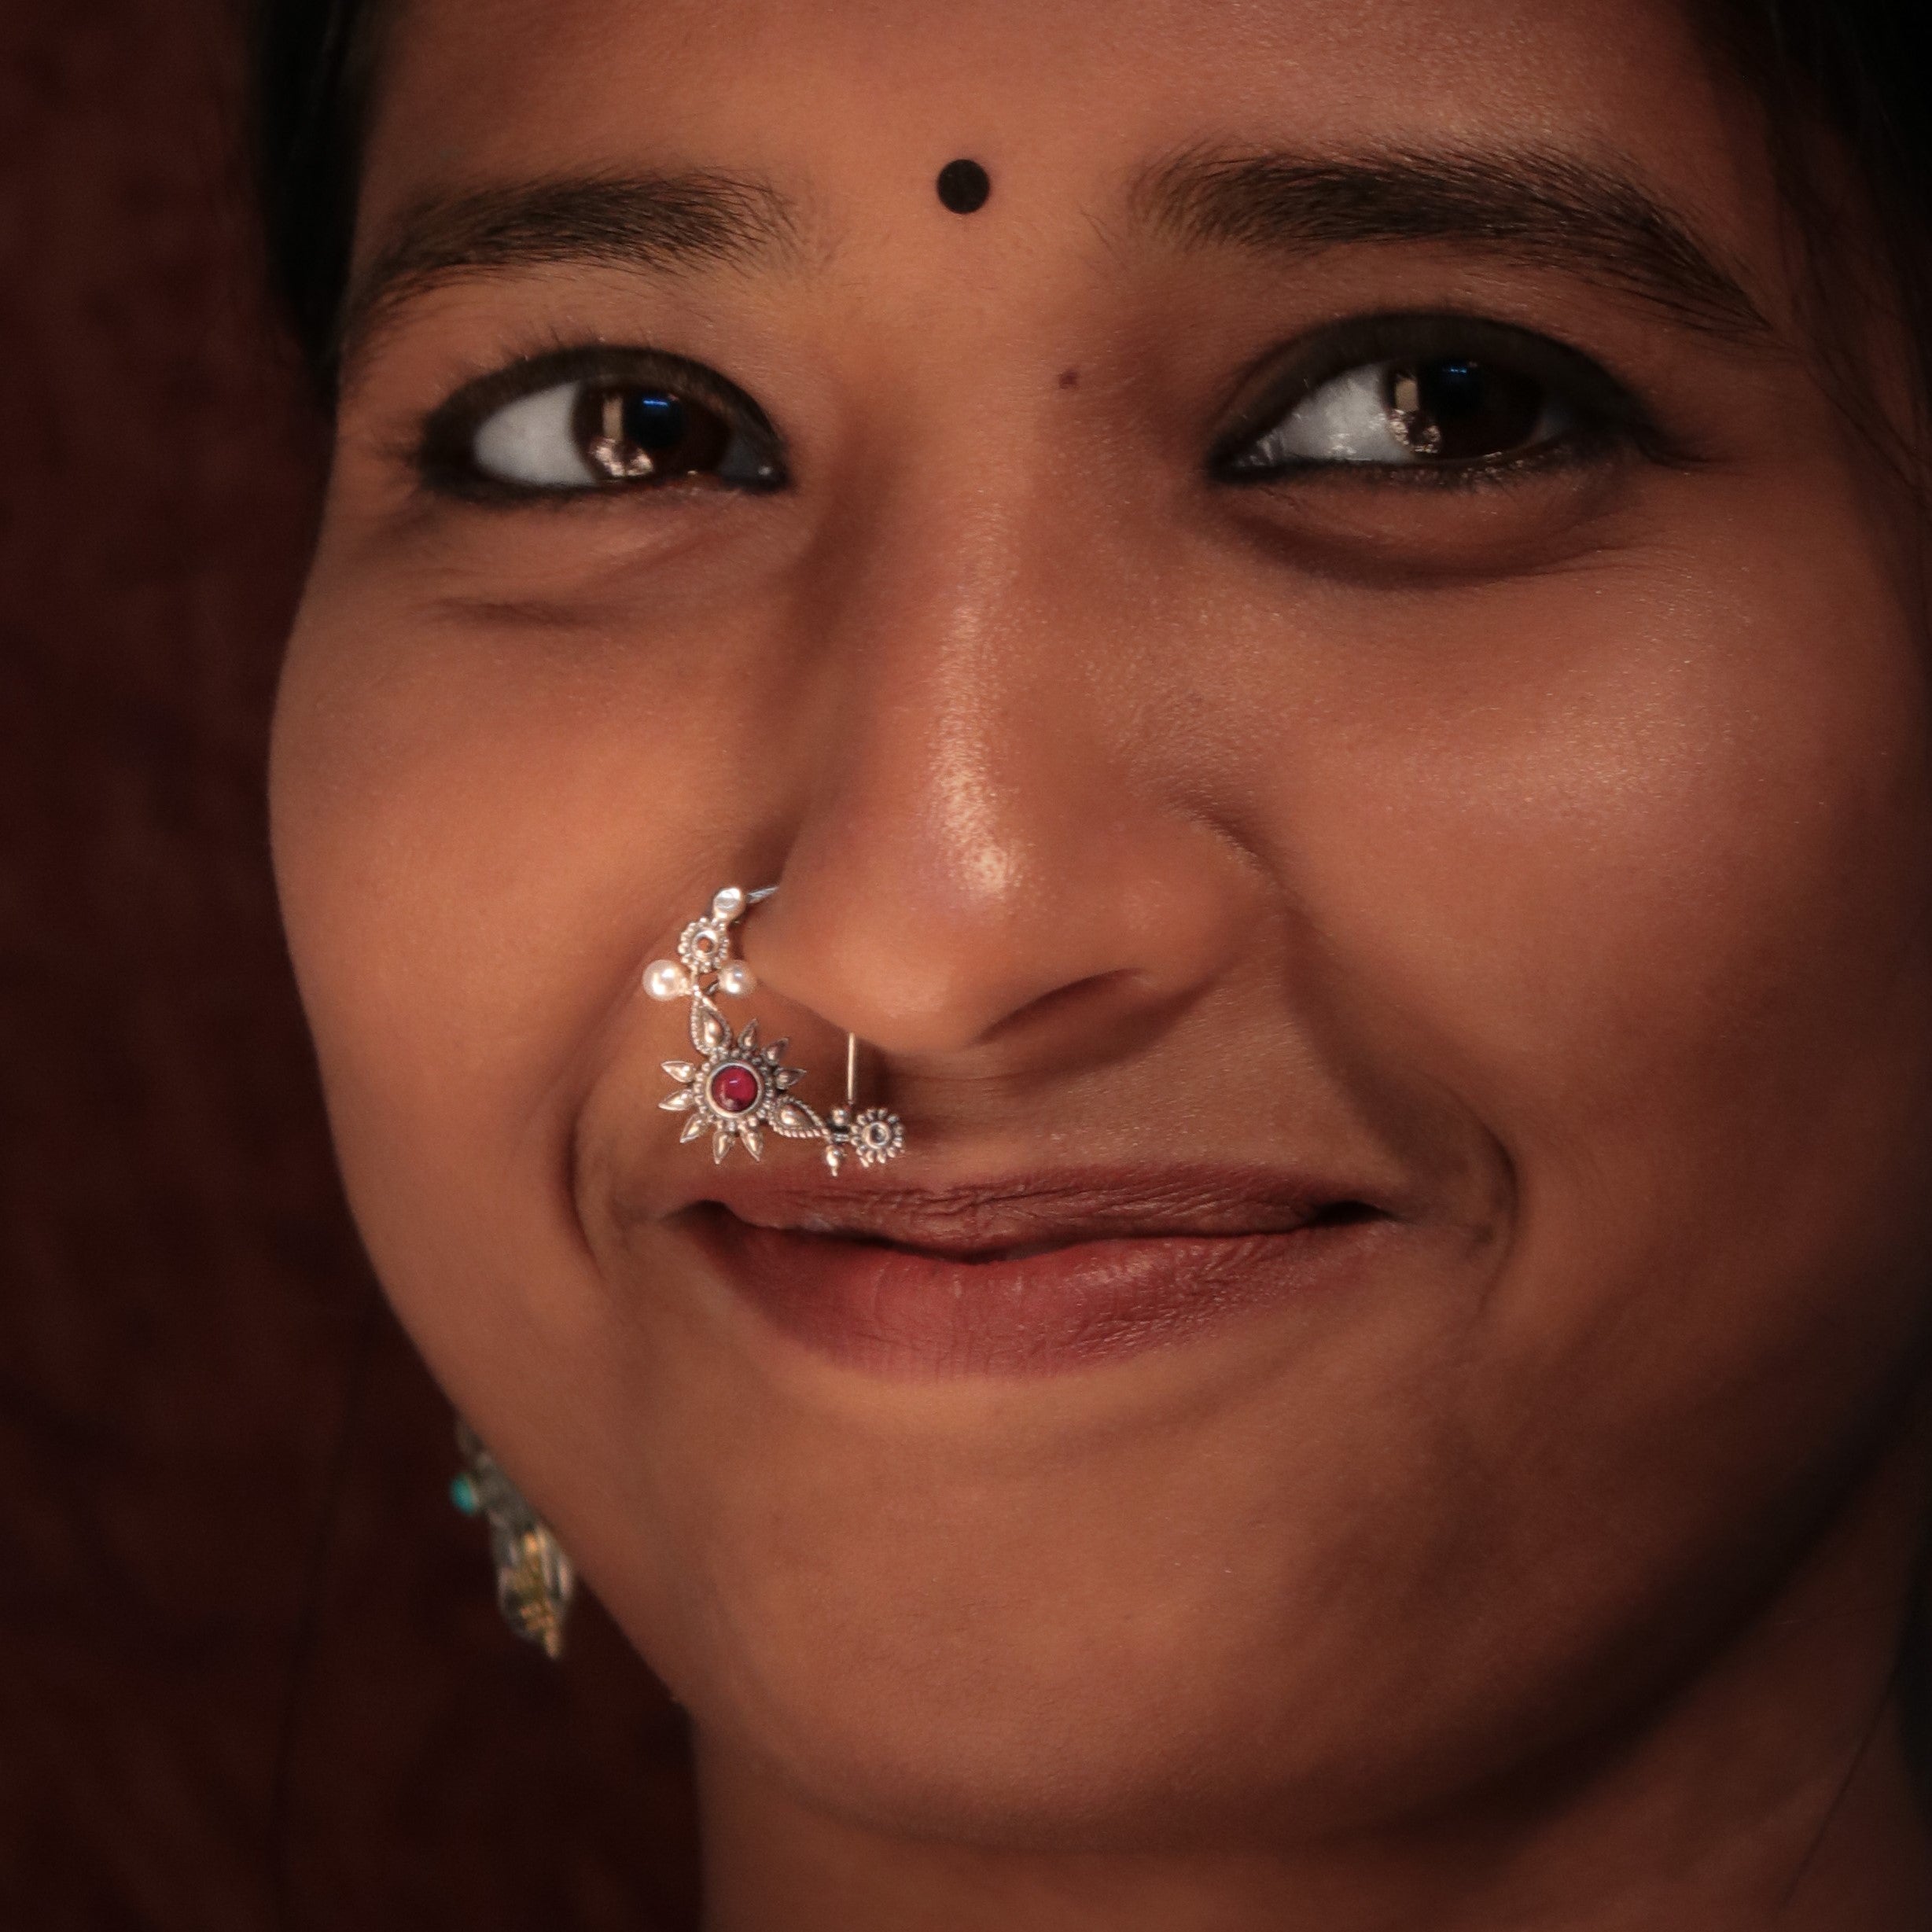 Gul Silver Nath/Nose Ring By Moha - Pierced Right